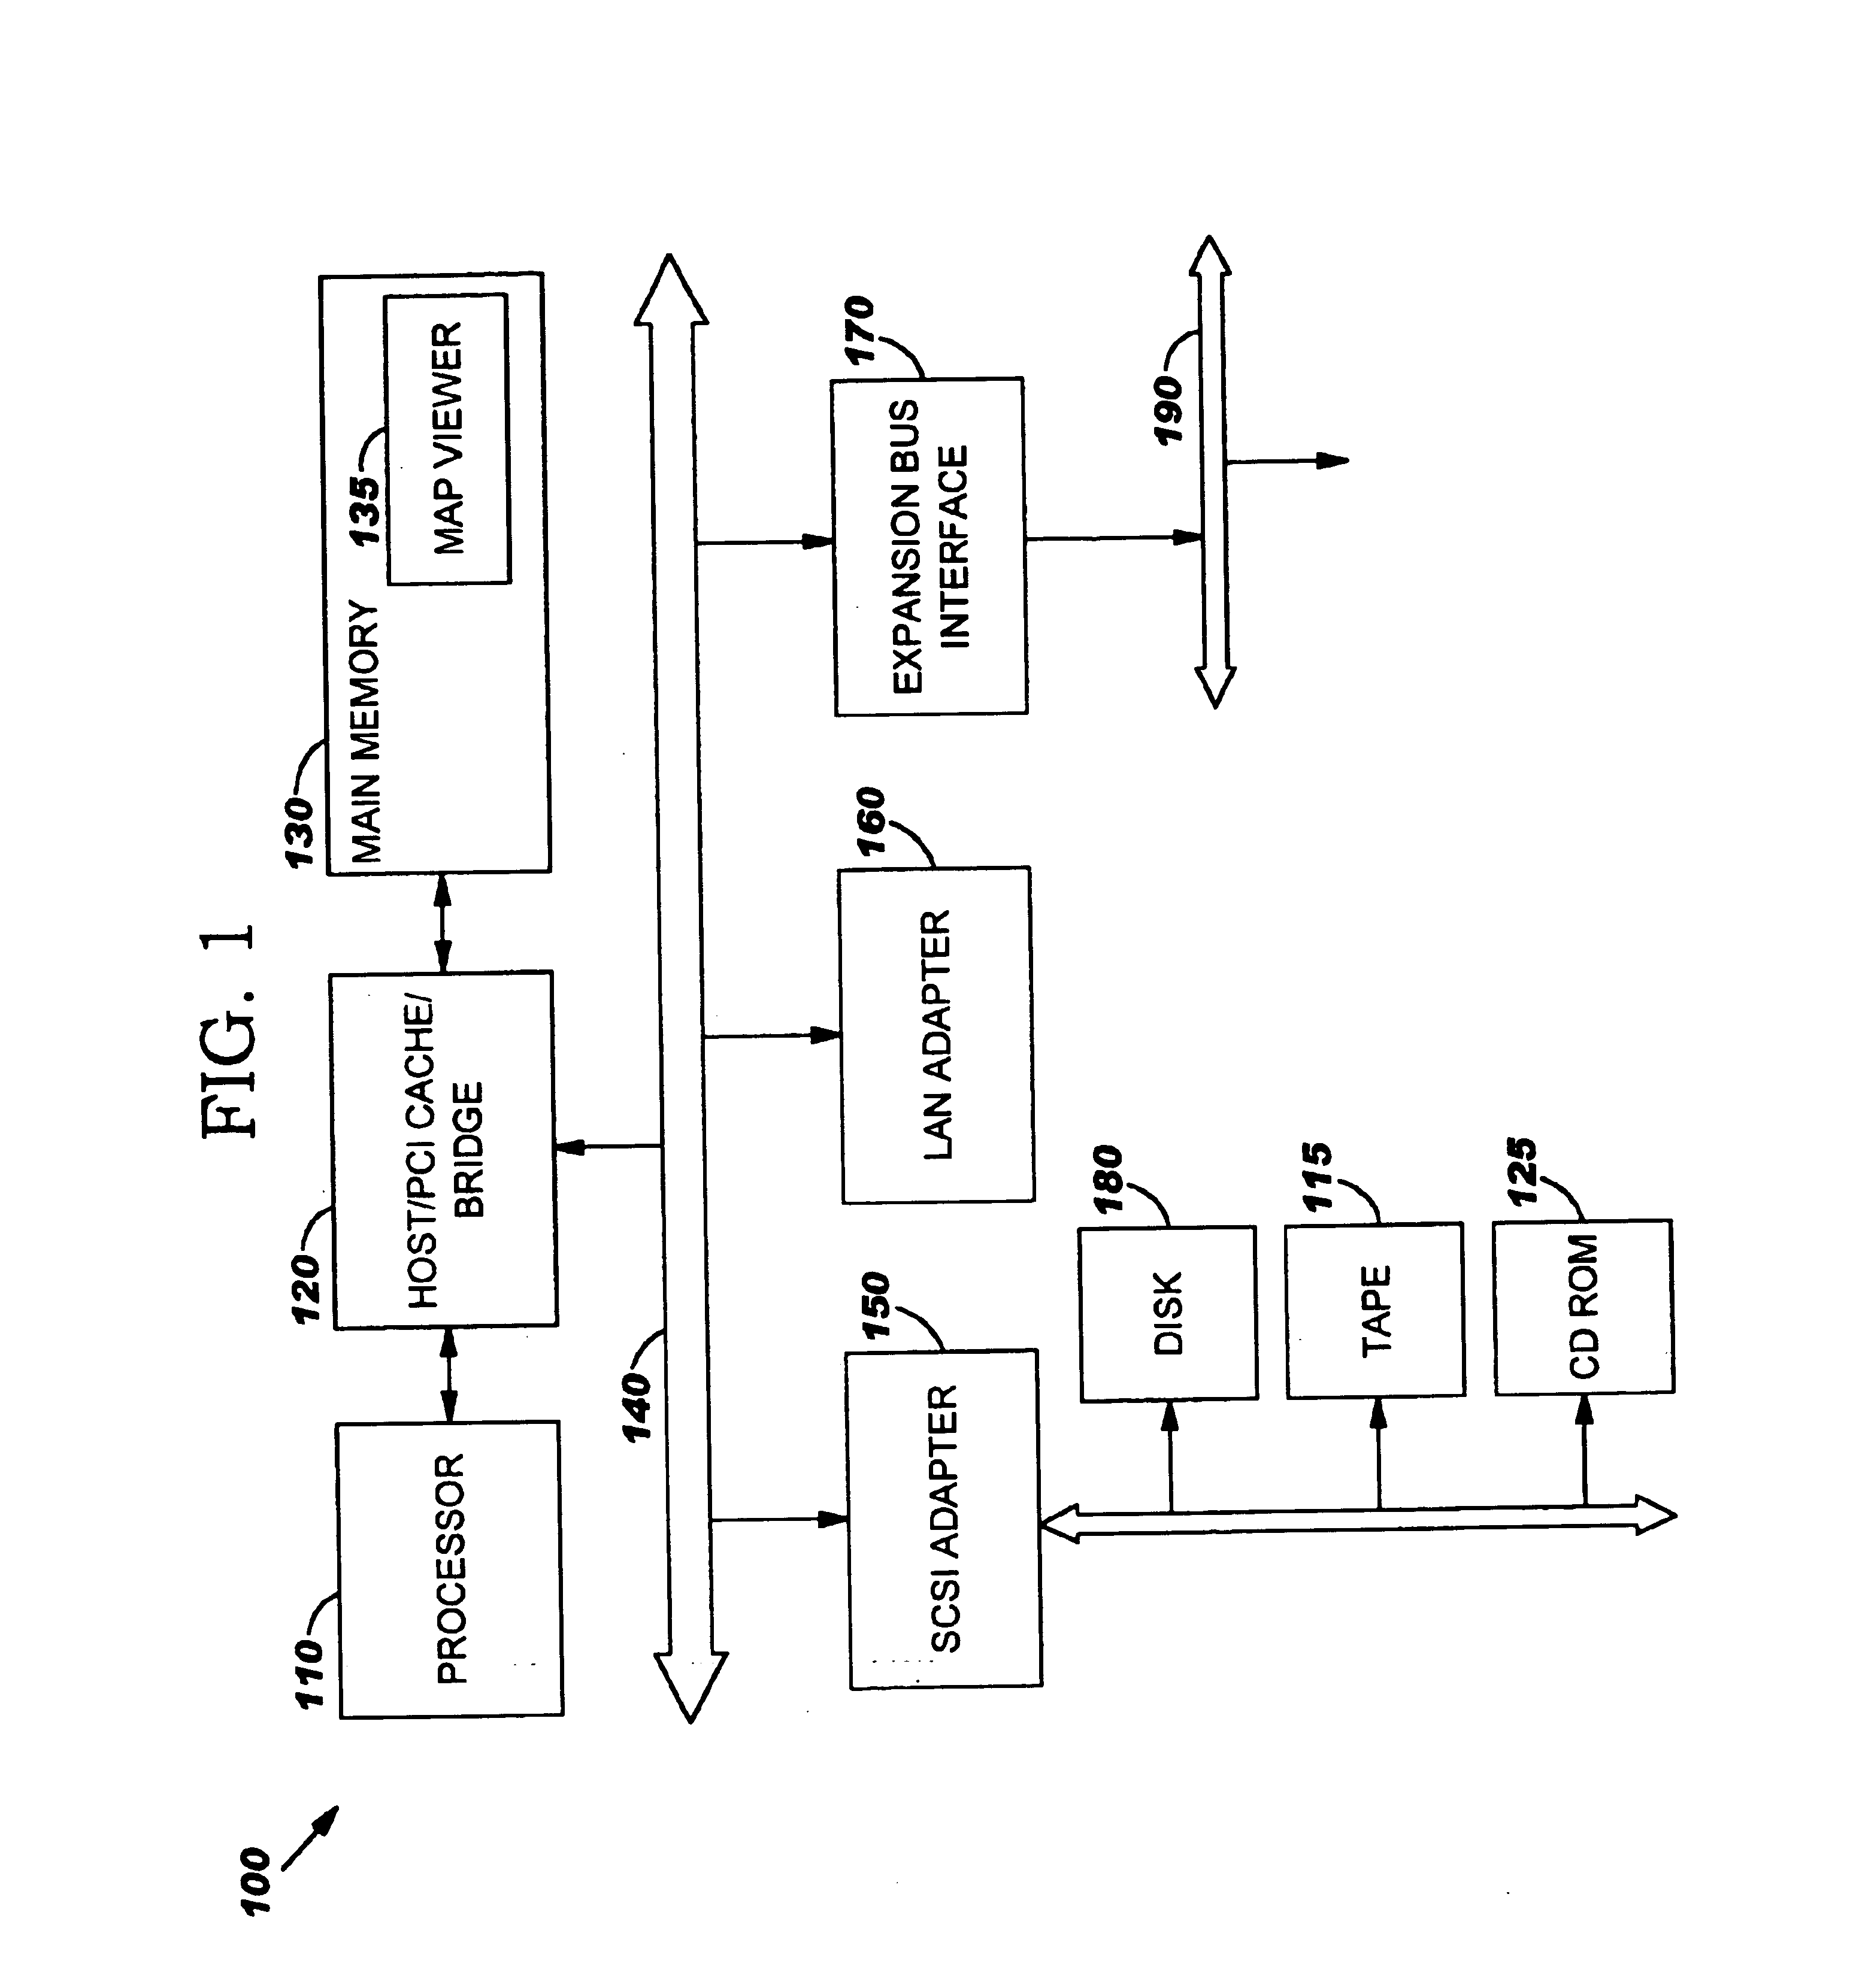 Methods and apparatus for providing a topology view based on heuristic information density